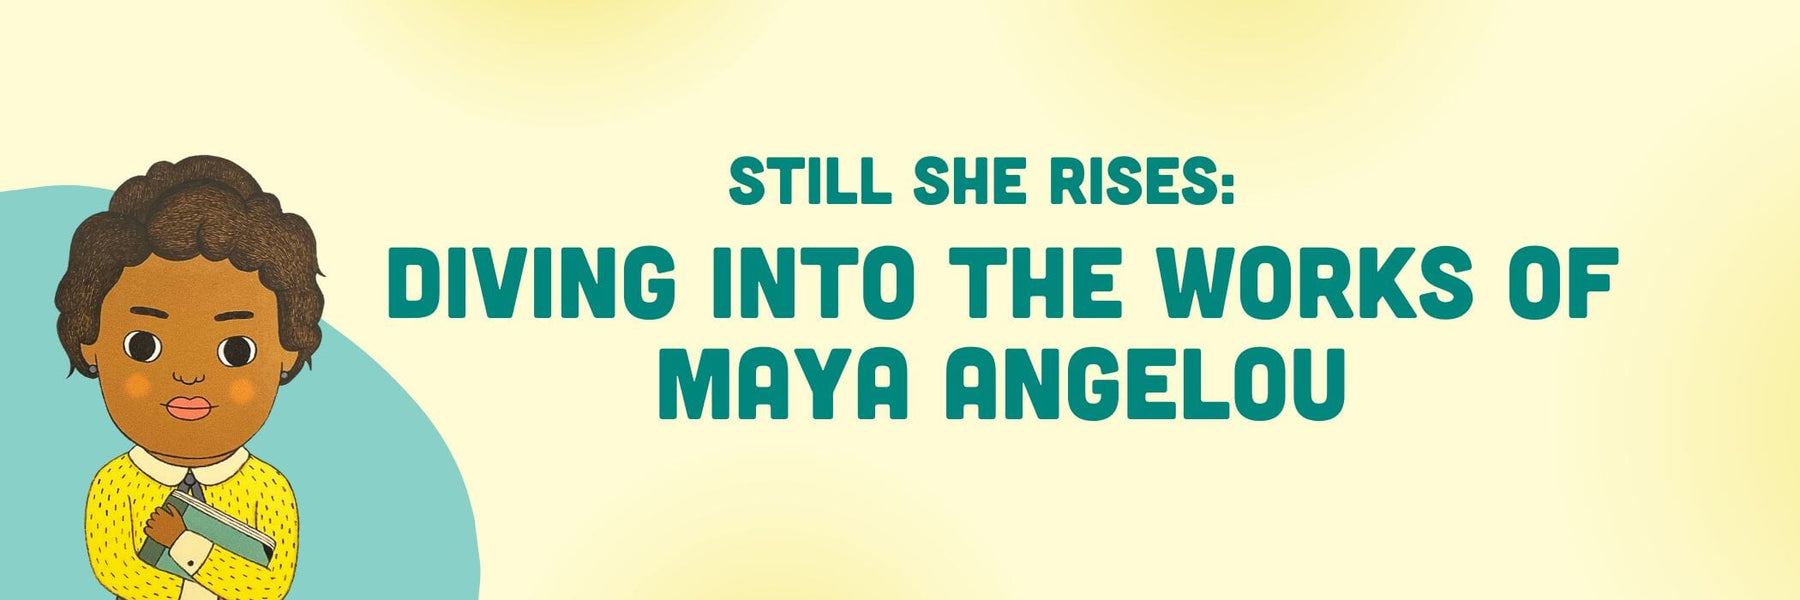 Still She Rises: Diving into the Works of Maya Angelou